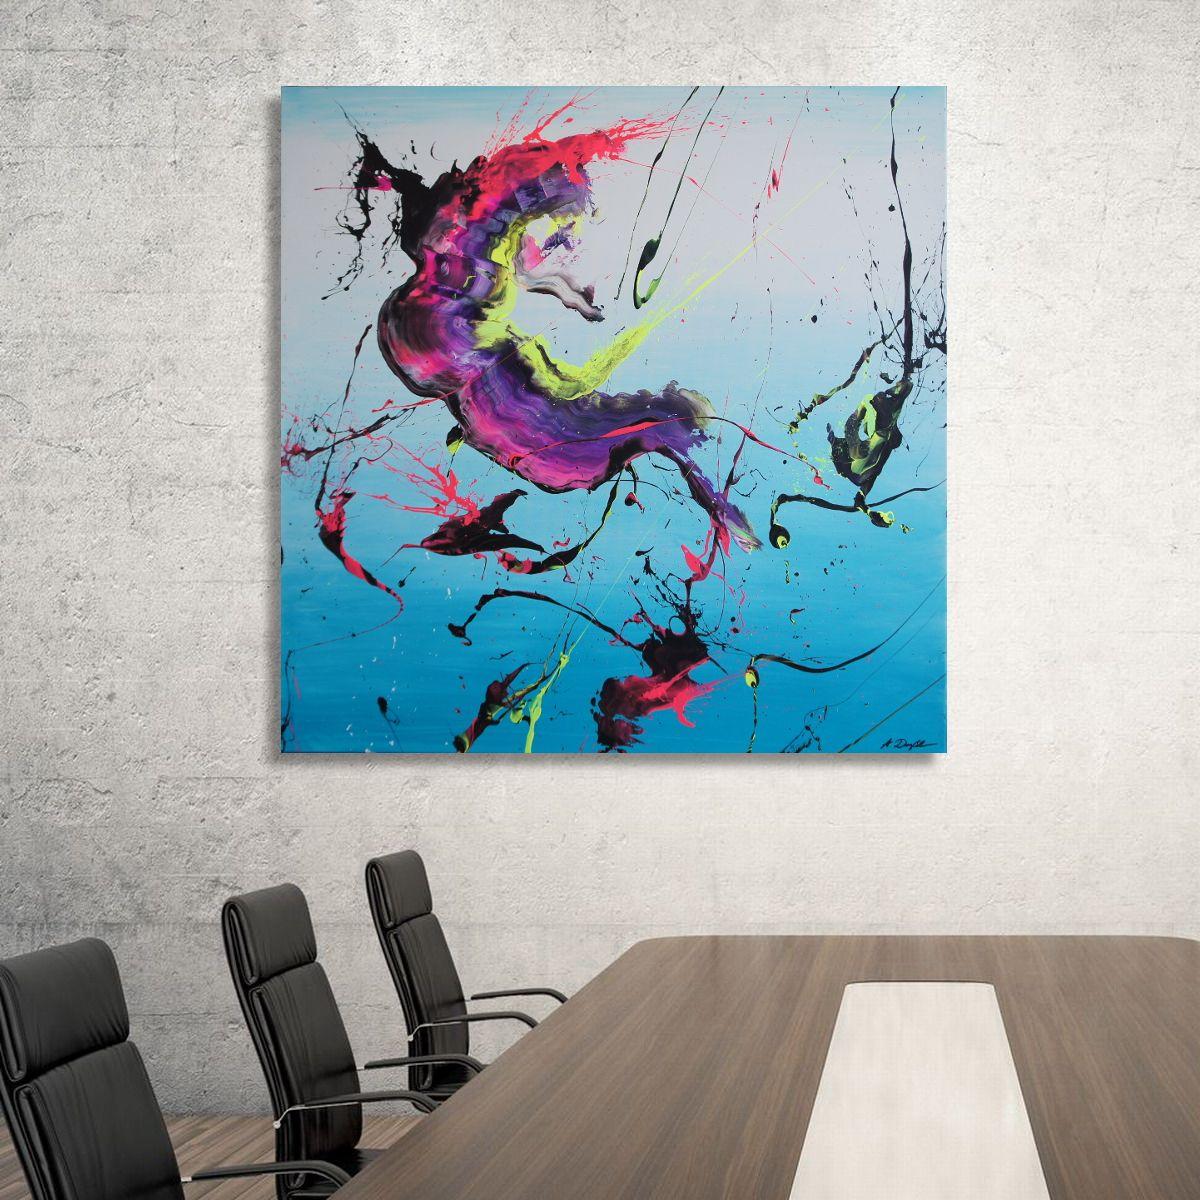 Hereâ€™s a large squared piece from my Spirits Of Skies Collection.    These paintings thrive from the bold colors, sometimes in neon, the wild and energy-loaded creatures that seem to float and constantly move above the skies of other worlds. Each